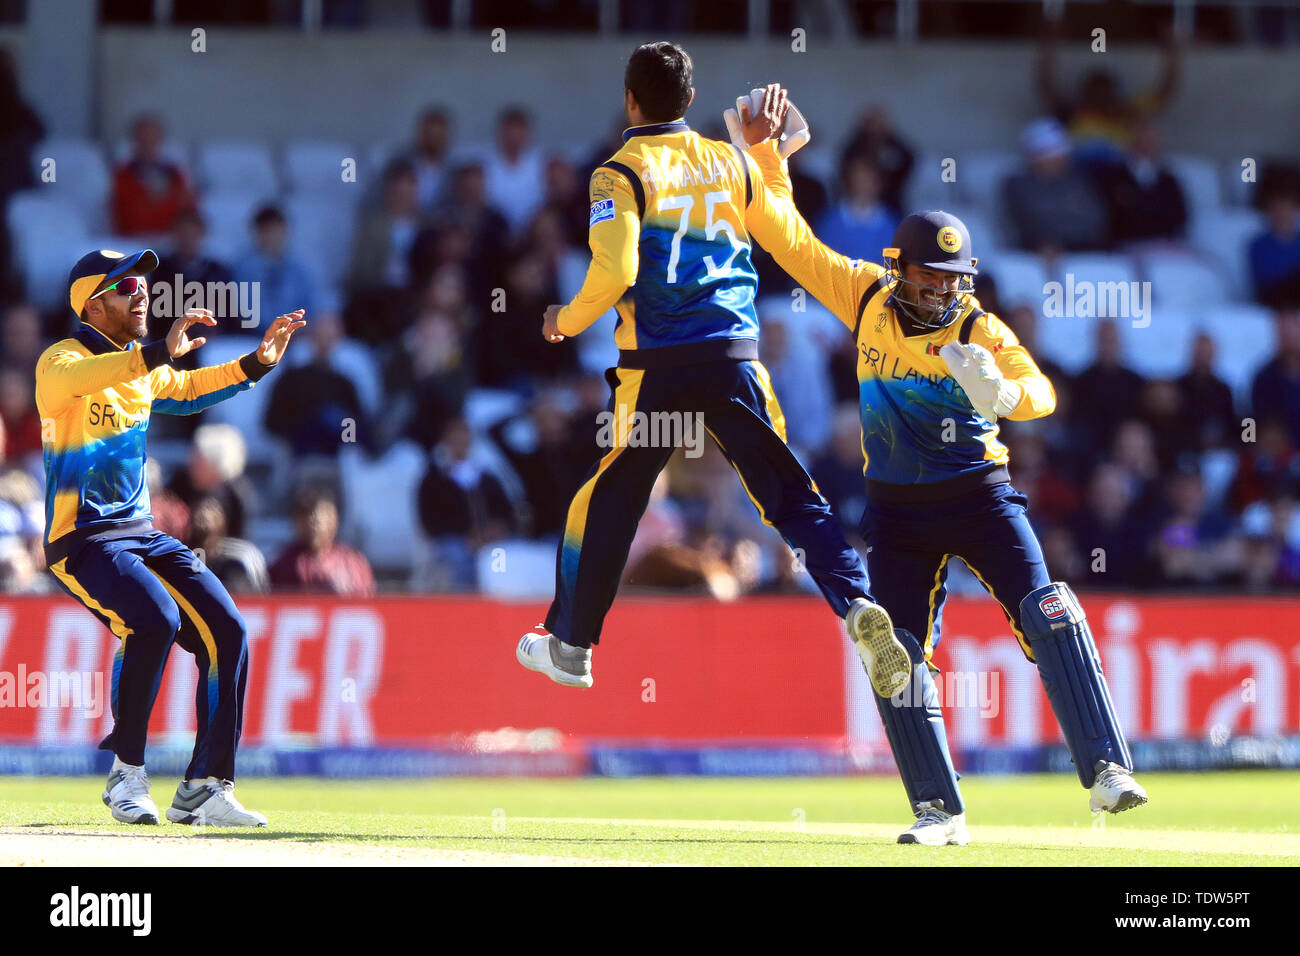 sri-lanka-wicketkeeper-kusal-perera-right-celebrates-catching-out-englands-adil-rashid-from-the-bowling-of-sri-lankas-dhananjaya-de-silva-during-the-icc-cricket-world-cup-group-stage-match-at-headingley-leeds-TDW5PT.jpg